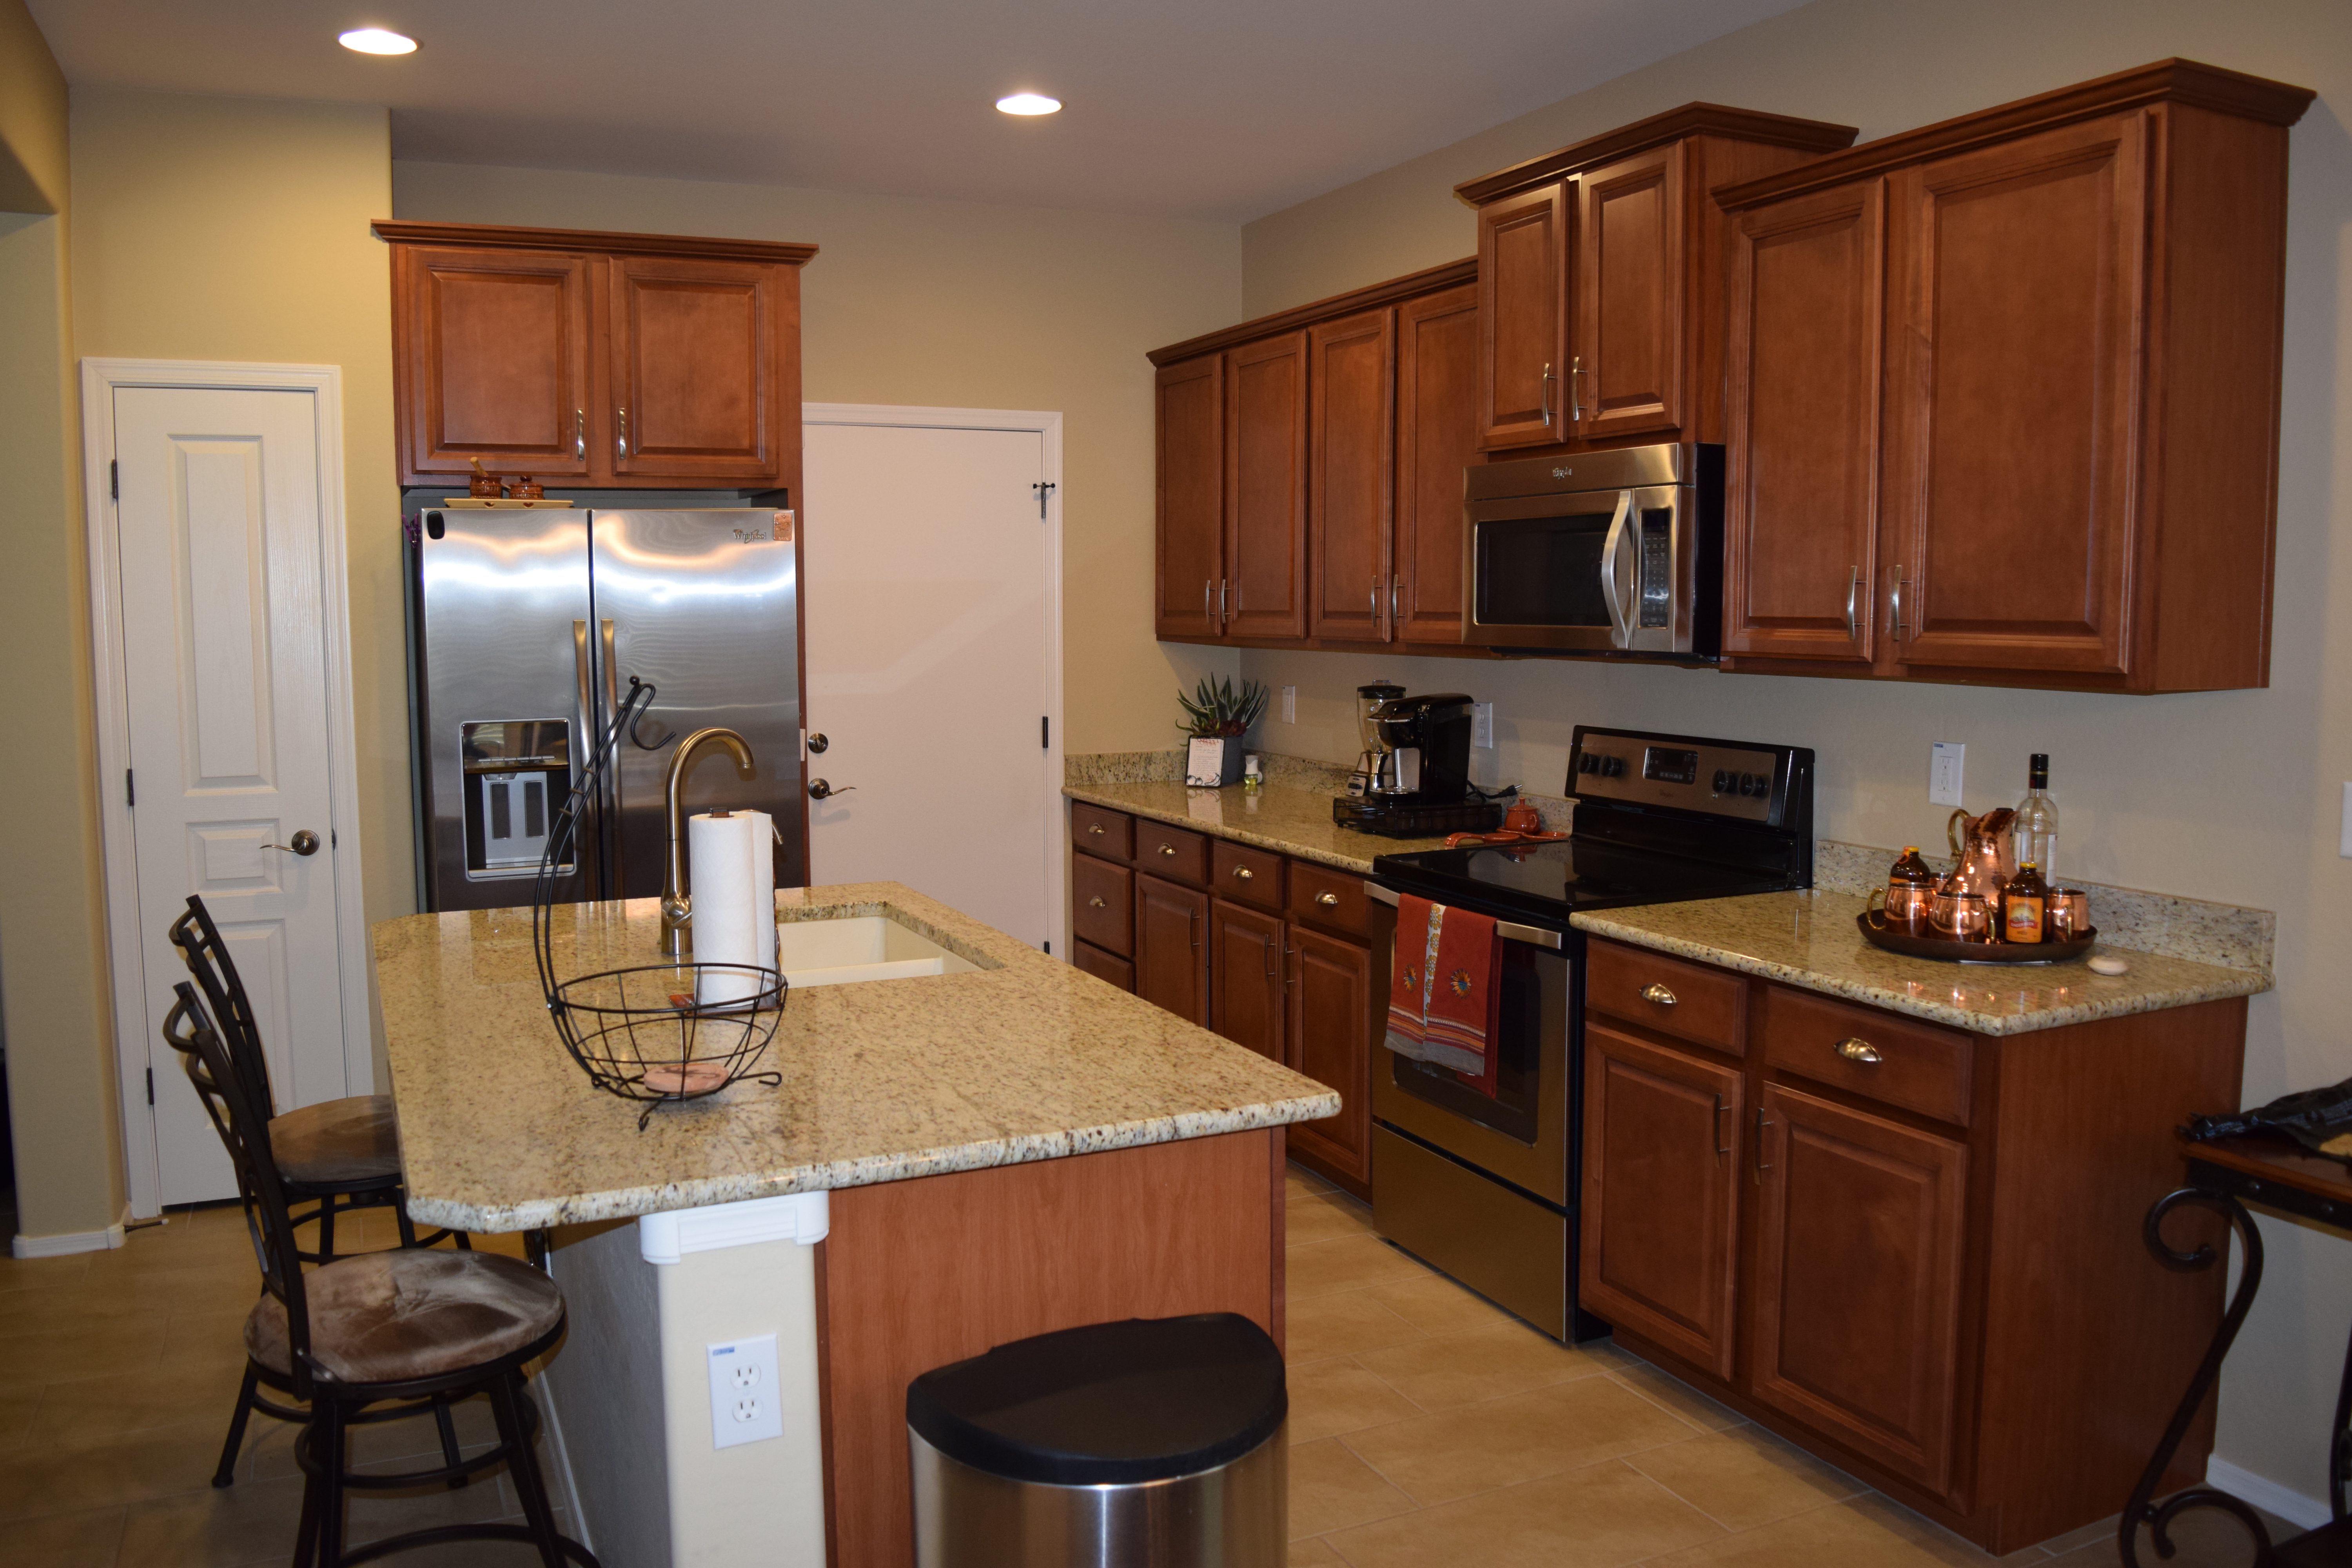 Upgraded Kitchen View, Stainless Steel Appliances, Granite Counter-tops, Kitchen Island, staggered Cabinetry.